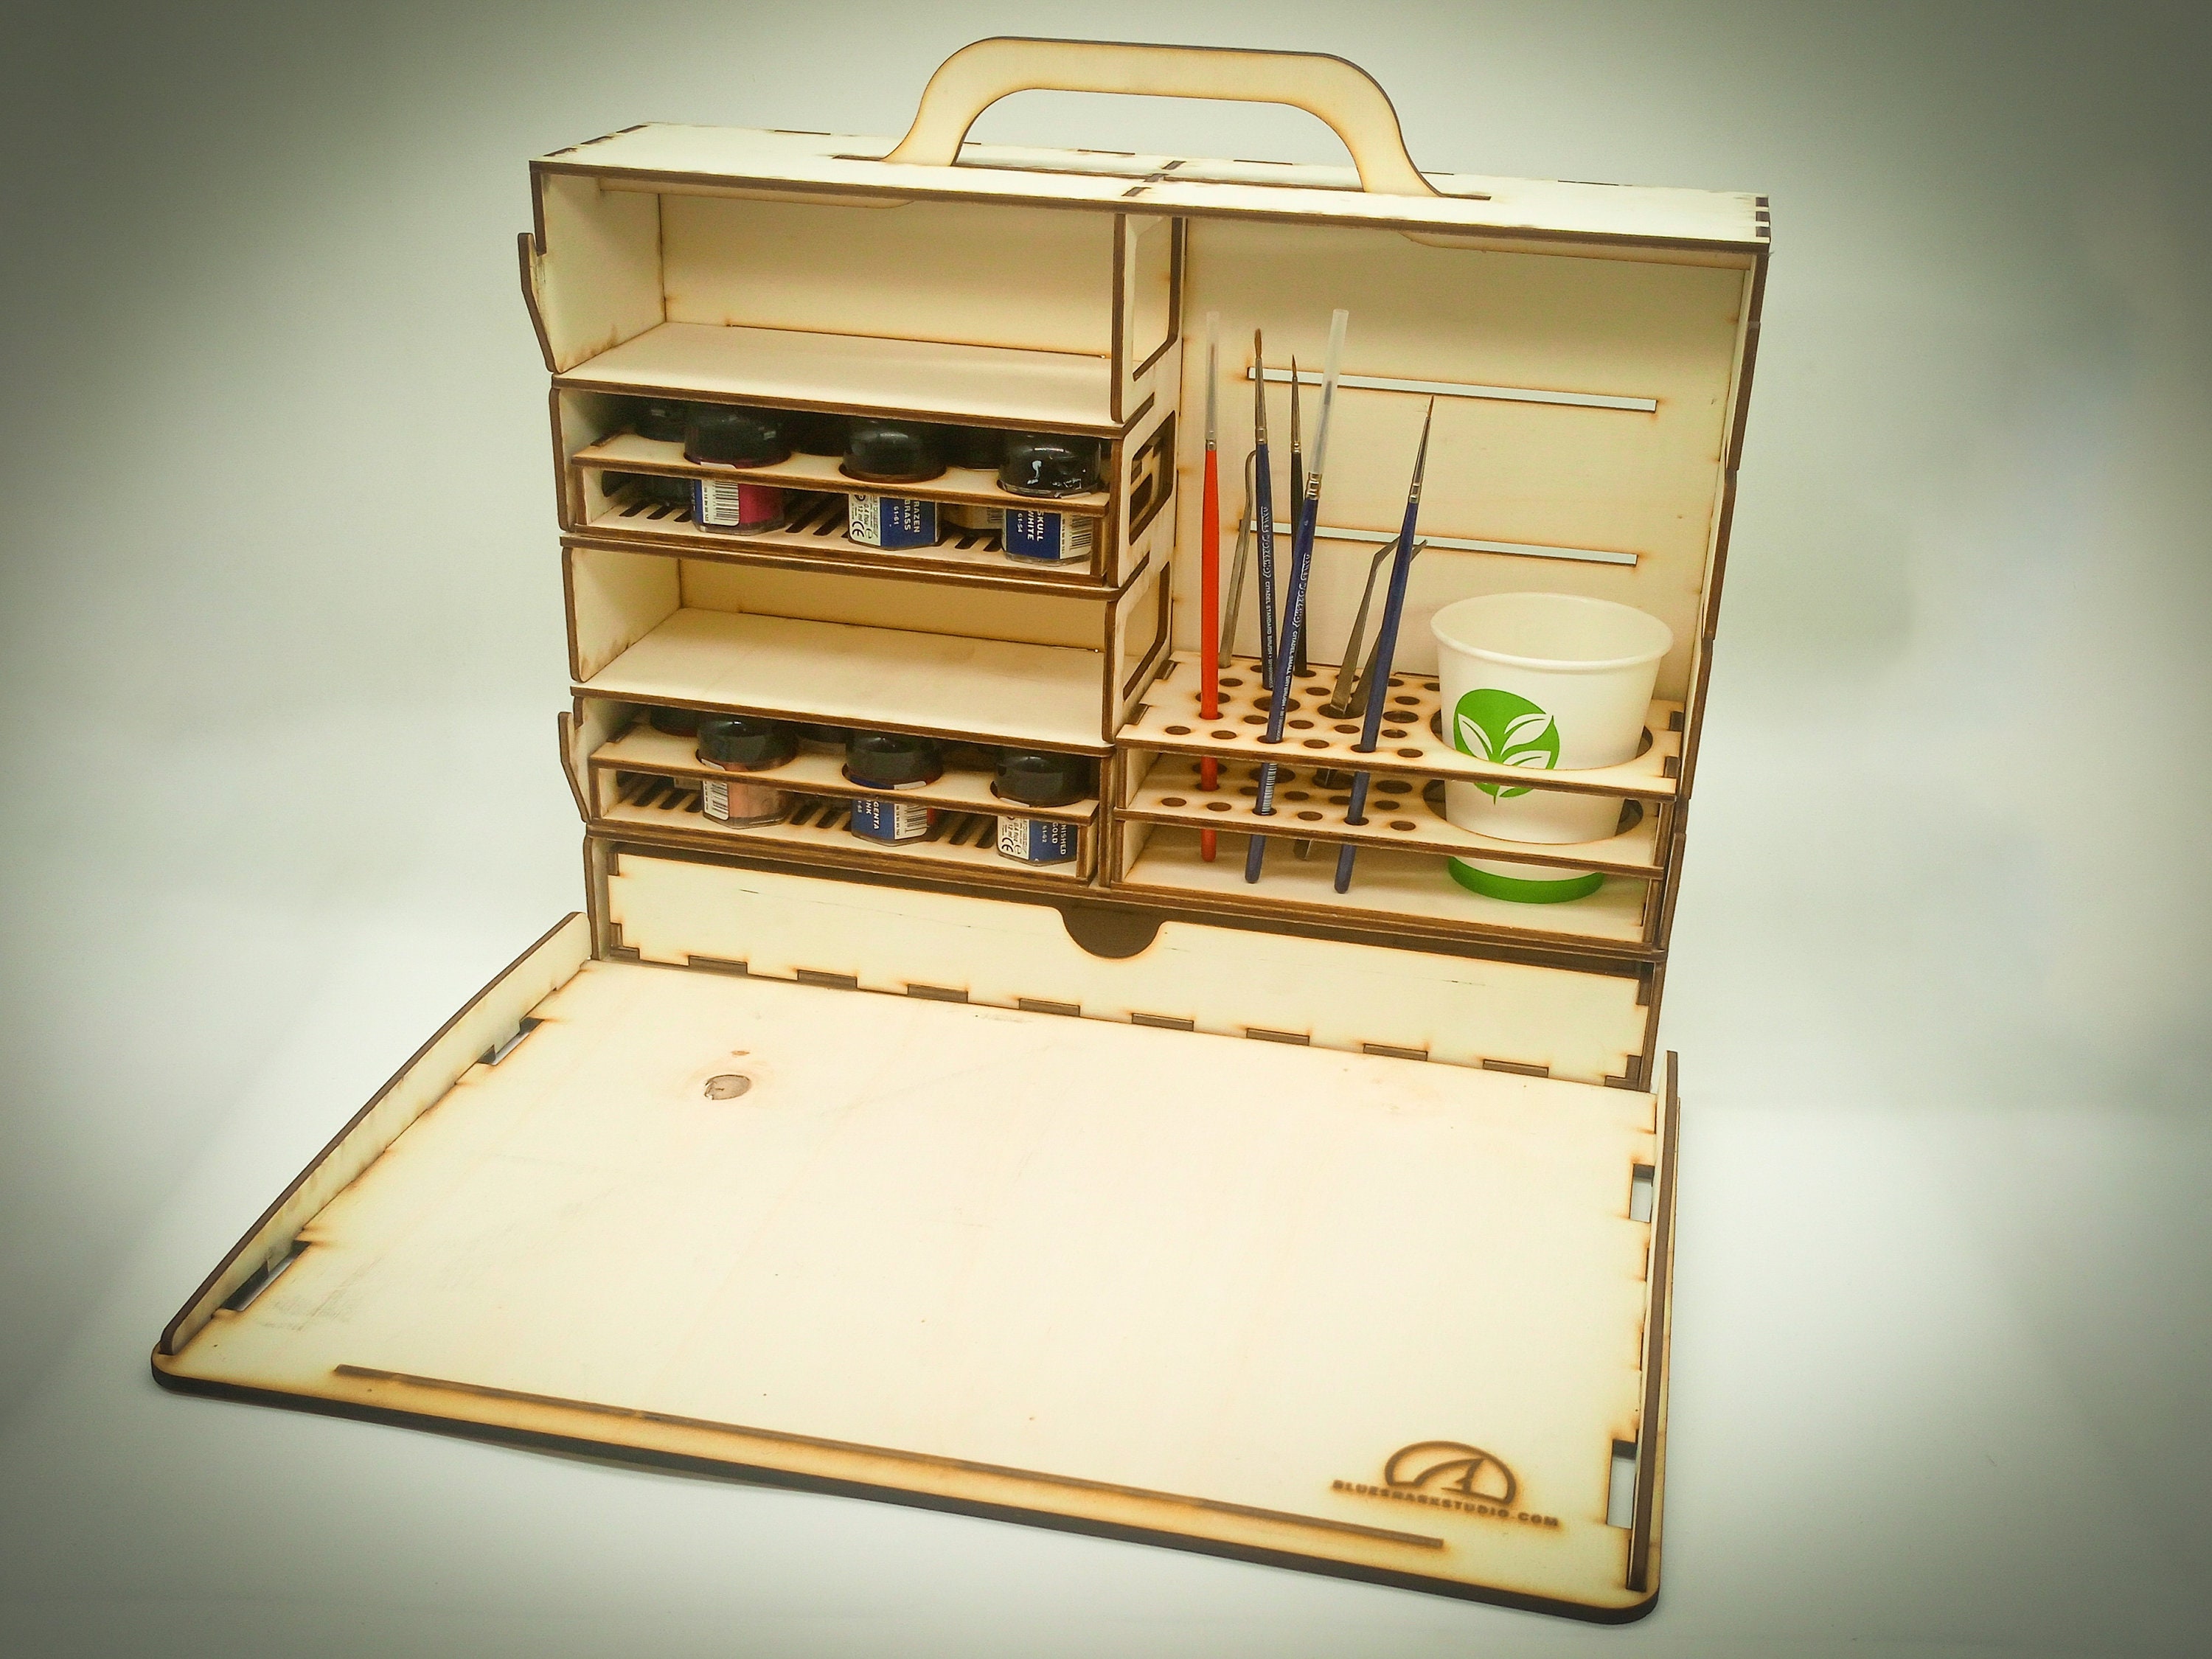 Paint storage rack for model painting, compatible with several